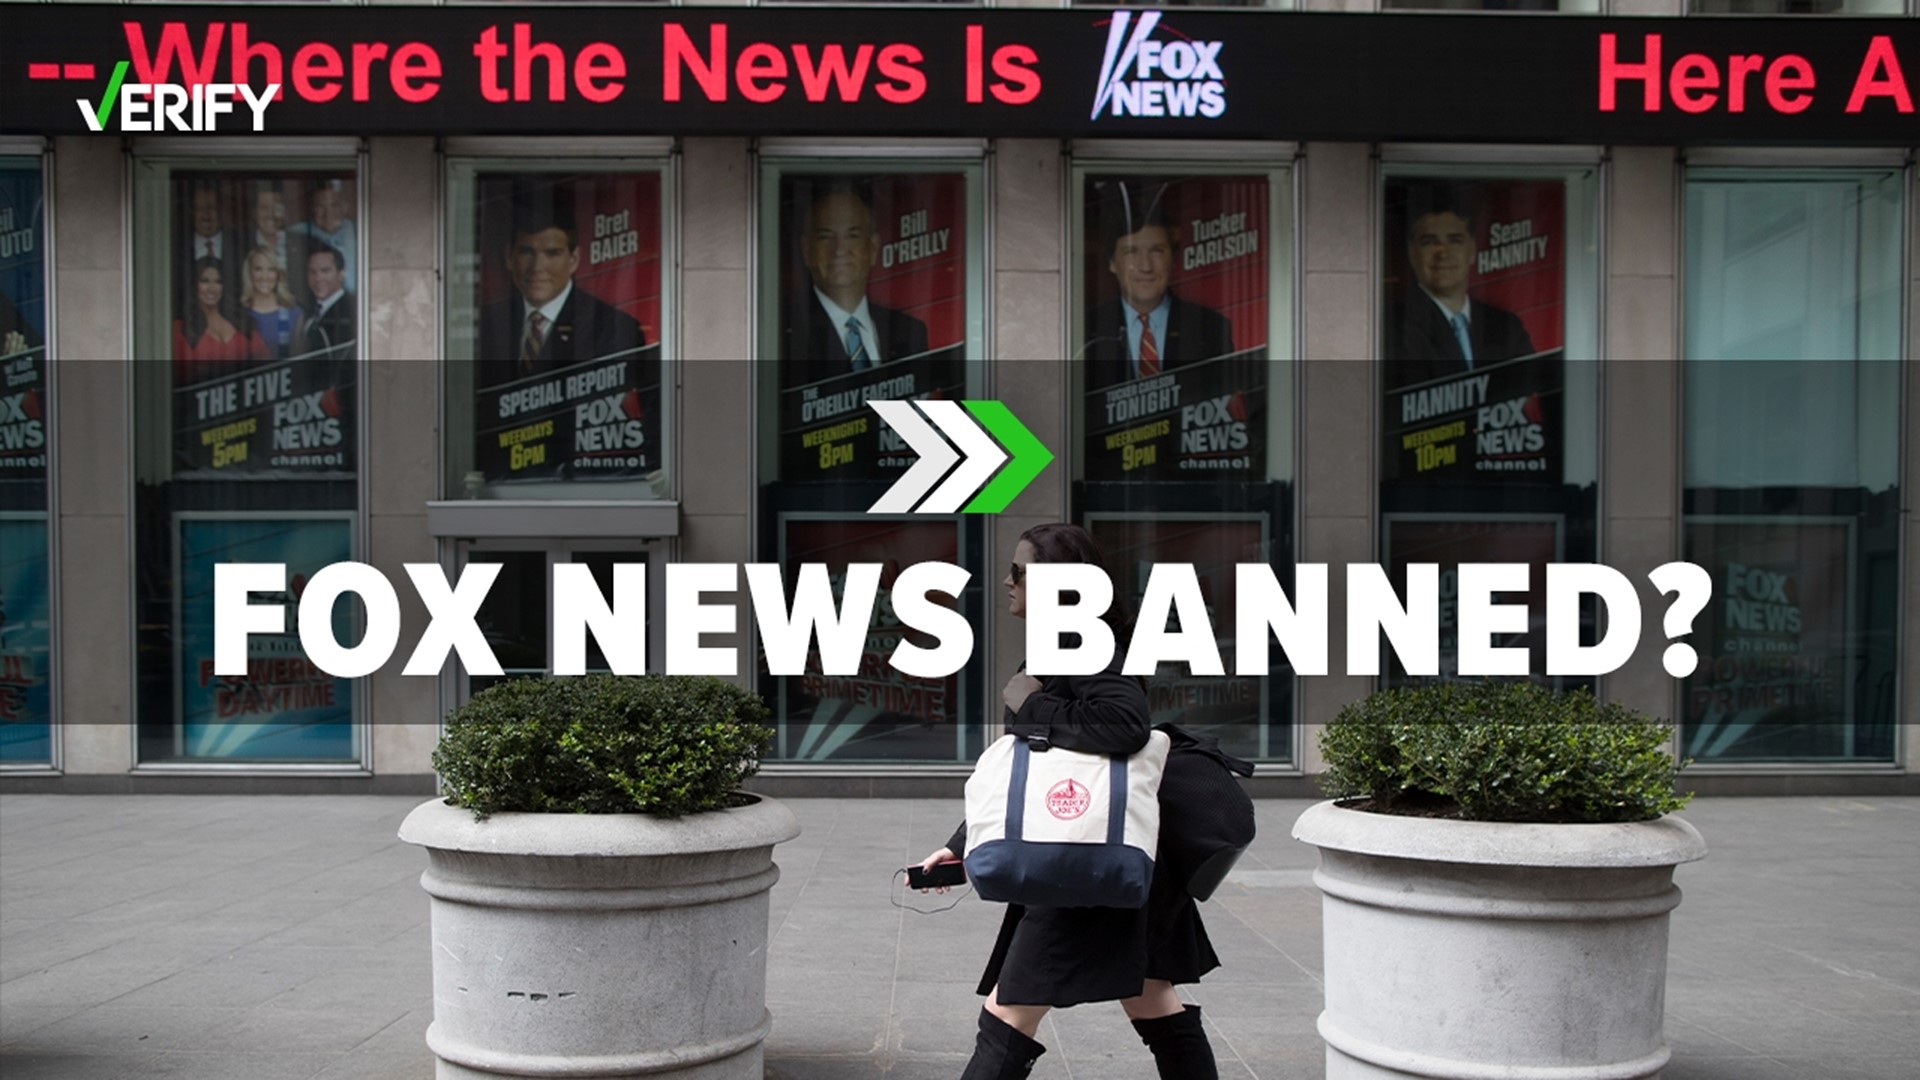 Is Fox News banned in Canada and the U.K.? The VERIFY team confirms this is false.